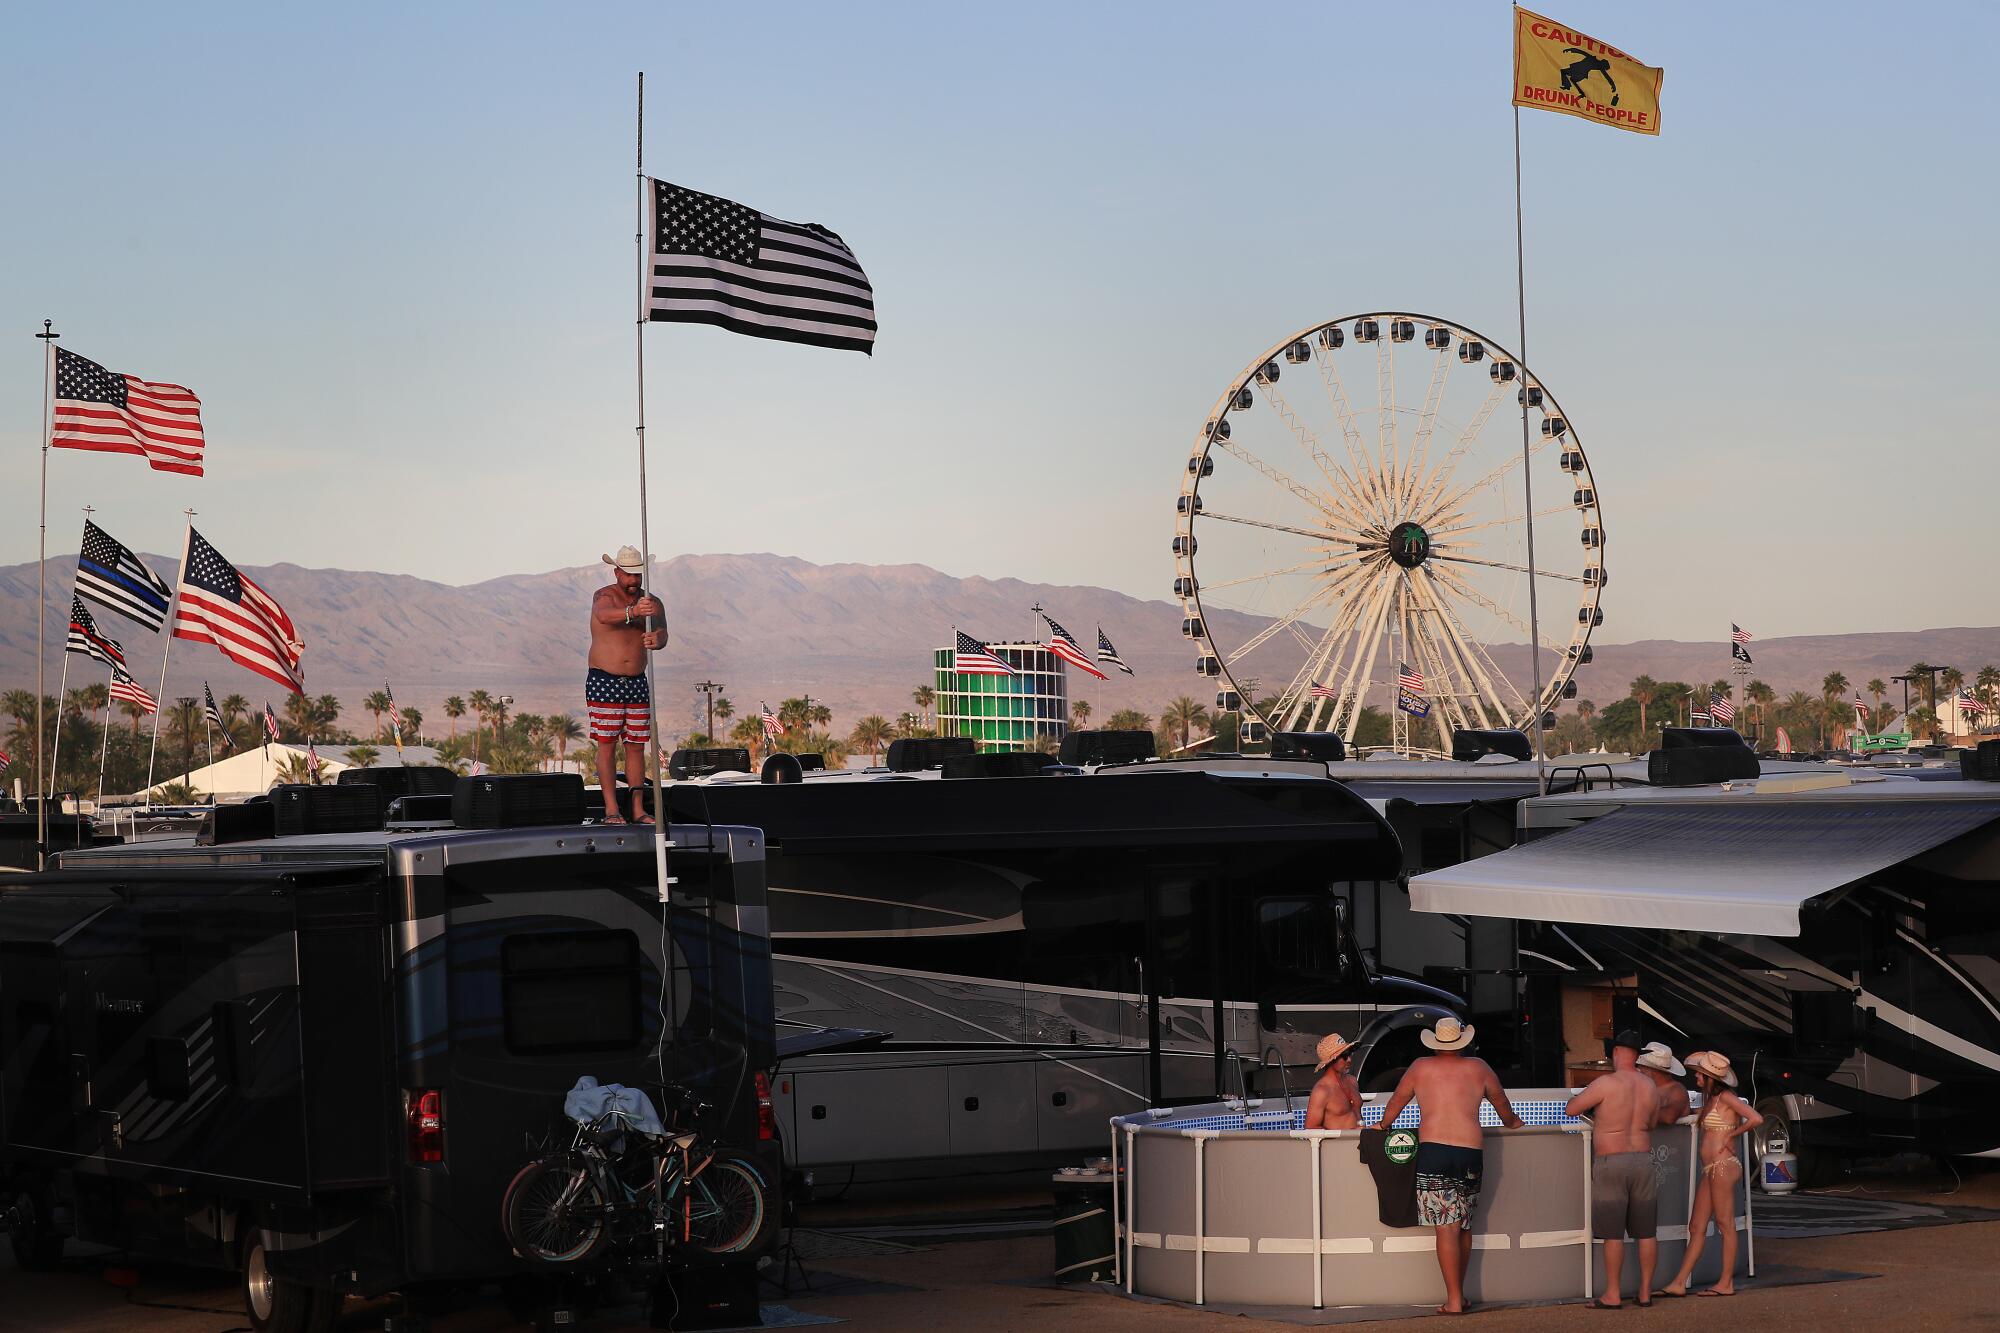 A man stands atop an RV raising an American flag as friends cool off in a portable pool with a Ferris wheel in the distance